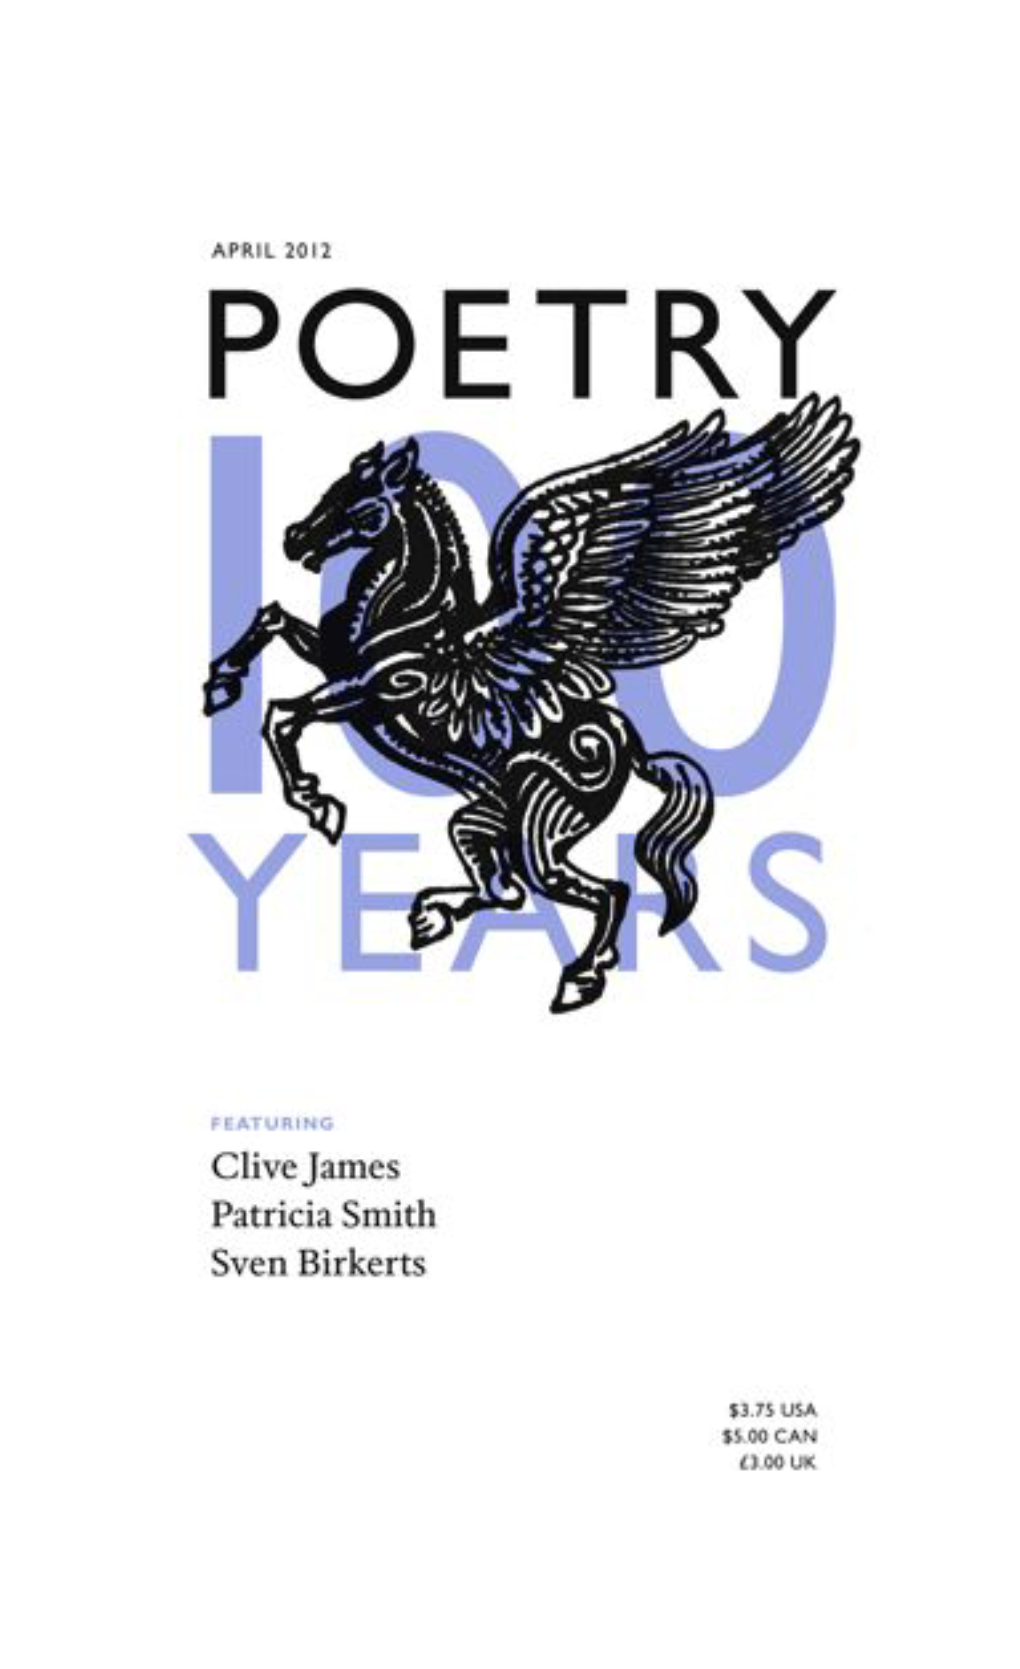 POETRY FOUNDATION Printed by Cadmus Professional Communications, Us